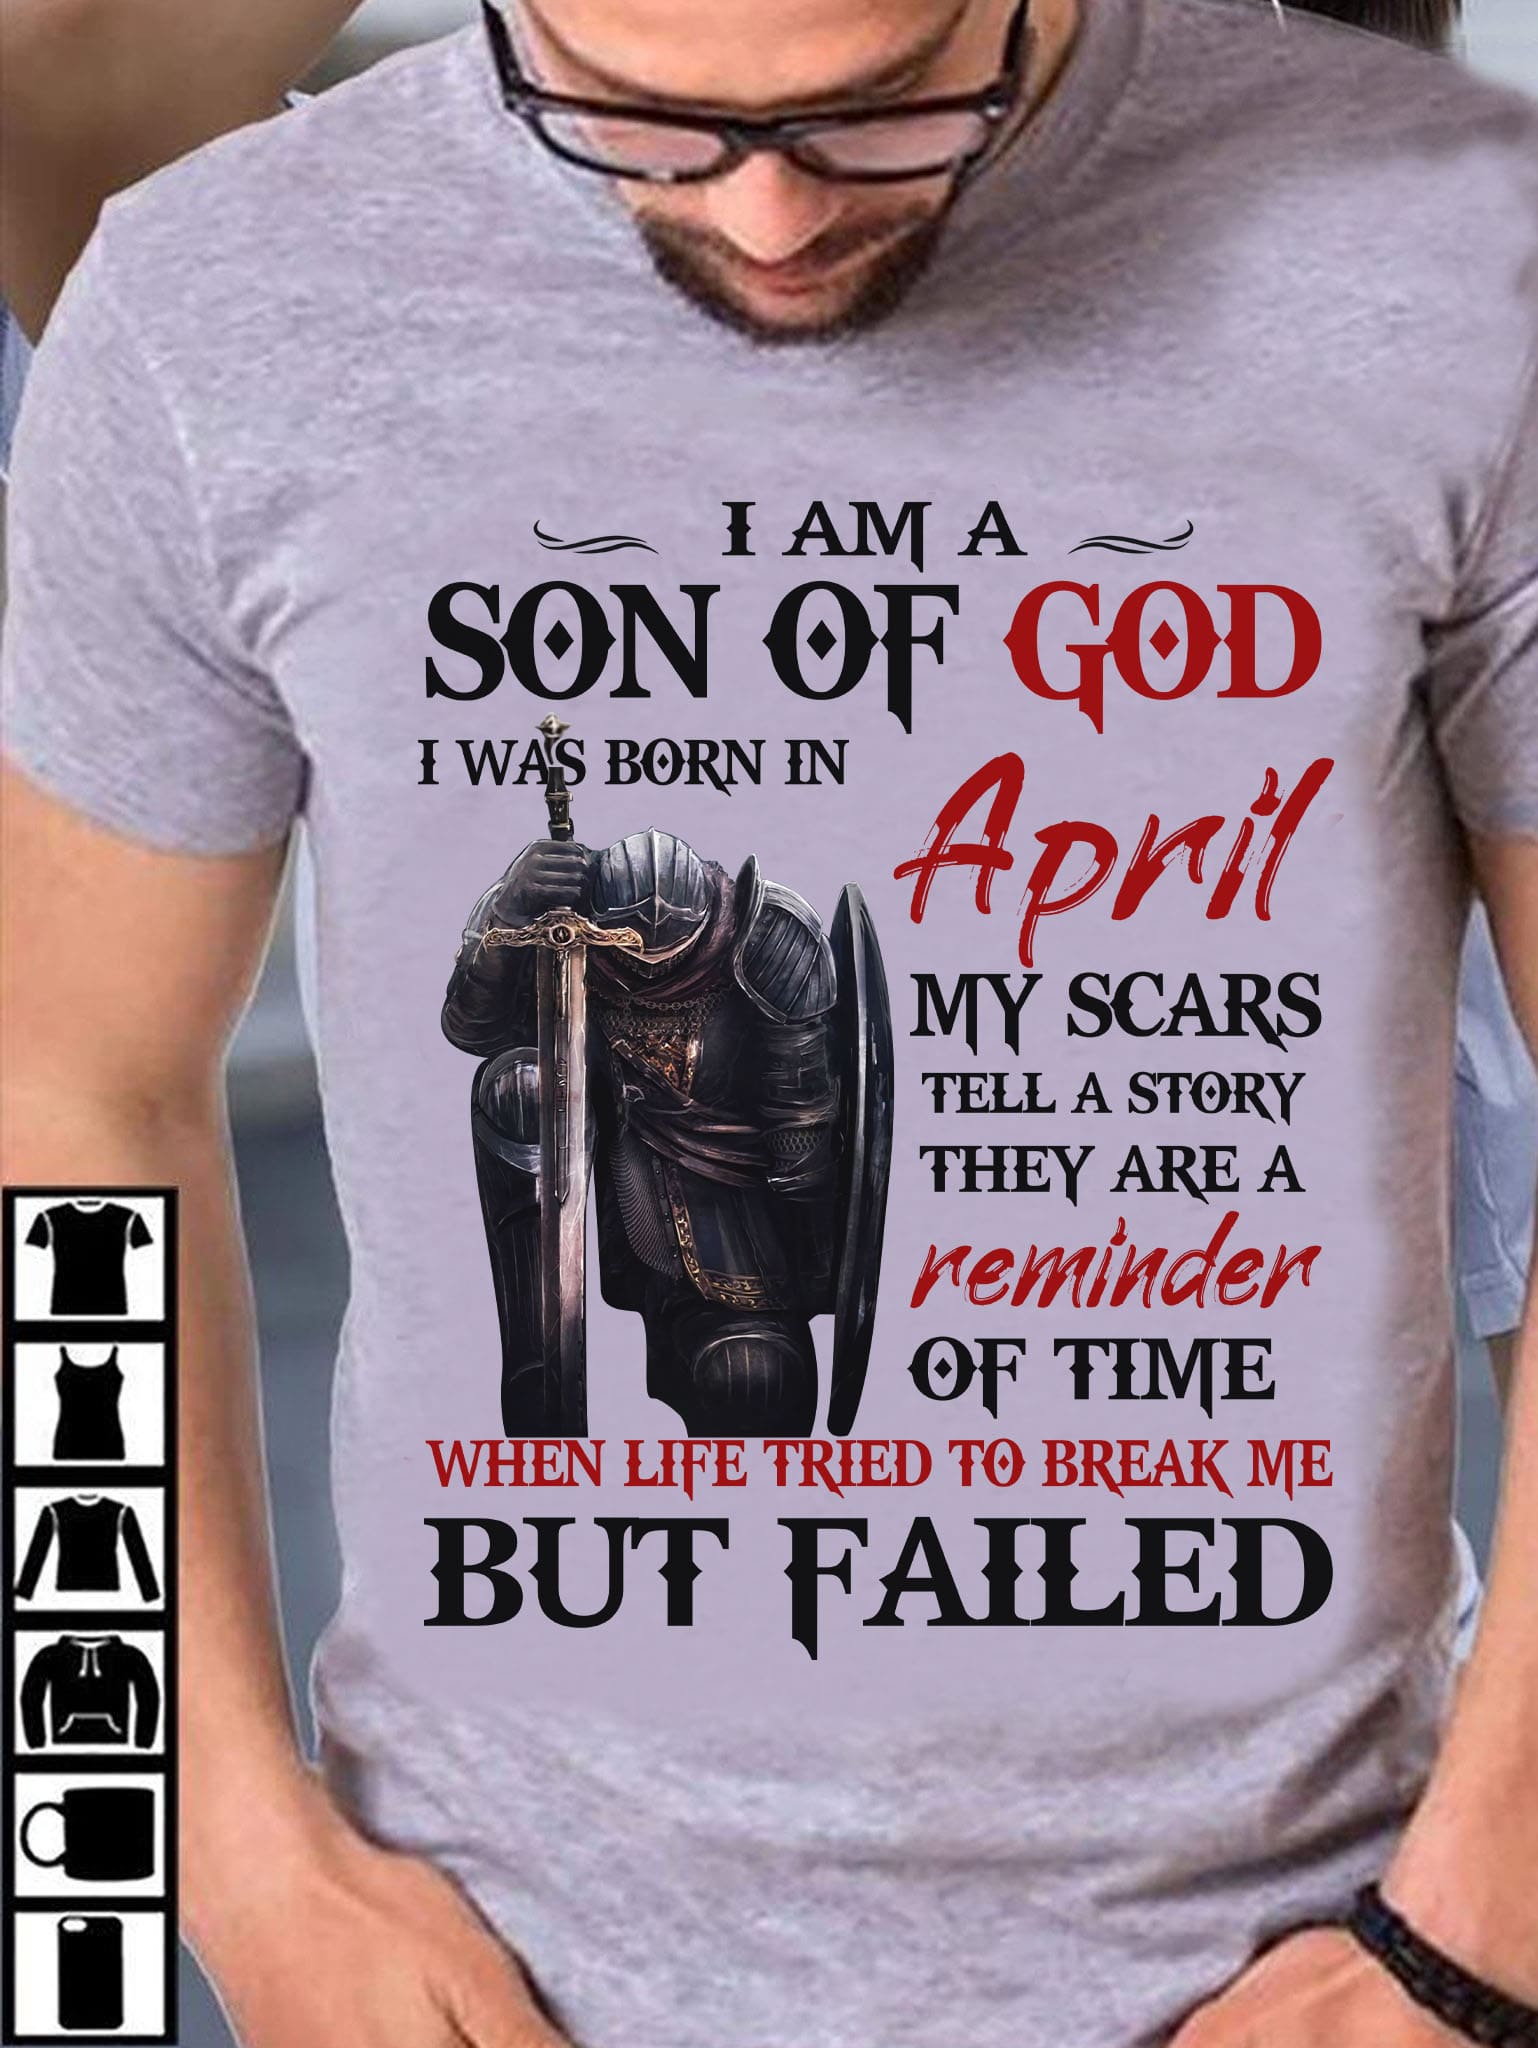 I am a Son of God I was born in April - April month of birth